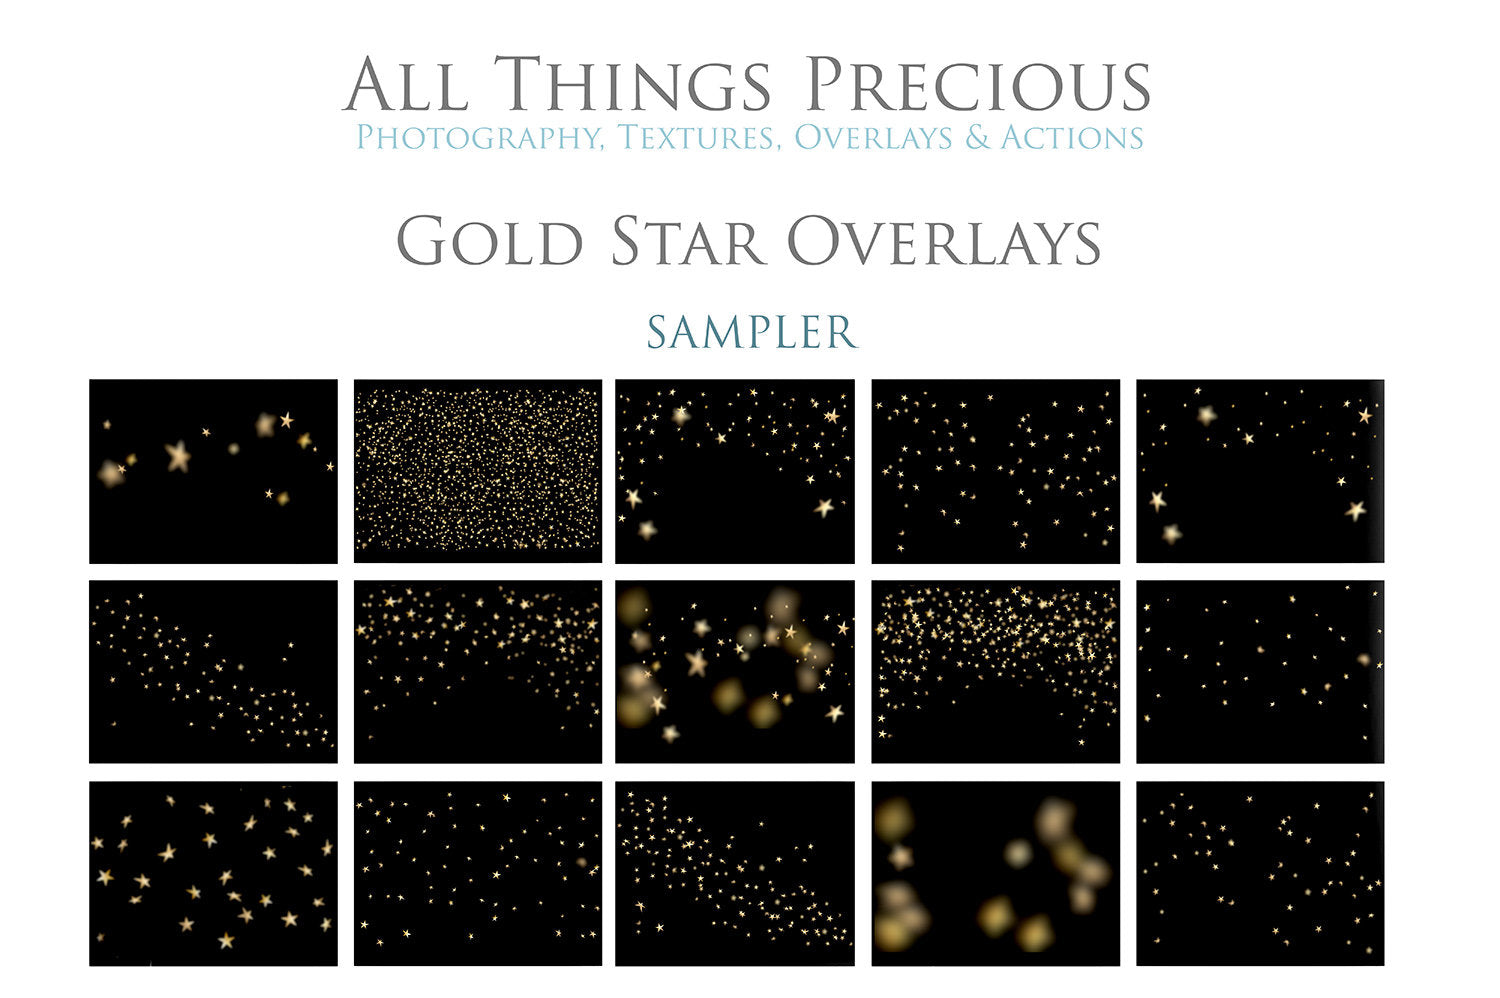 Png overlays for photographers, digital art and scrapbooking. Star overlays, confetti overlay, photo overlay, High resolution photography overlays by ATP textures.